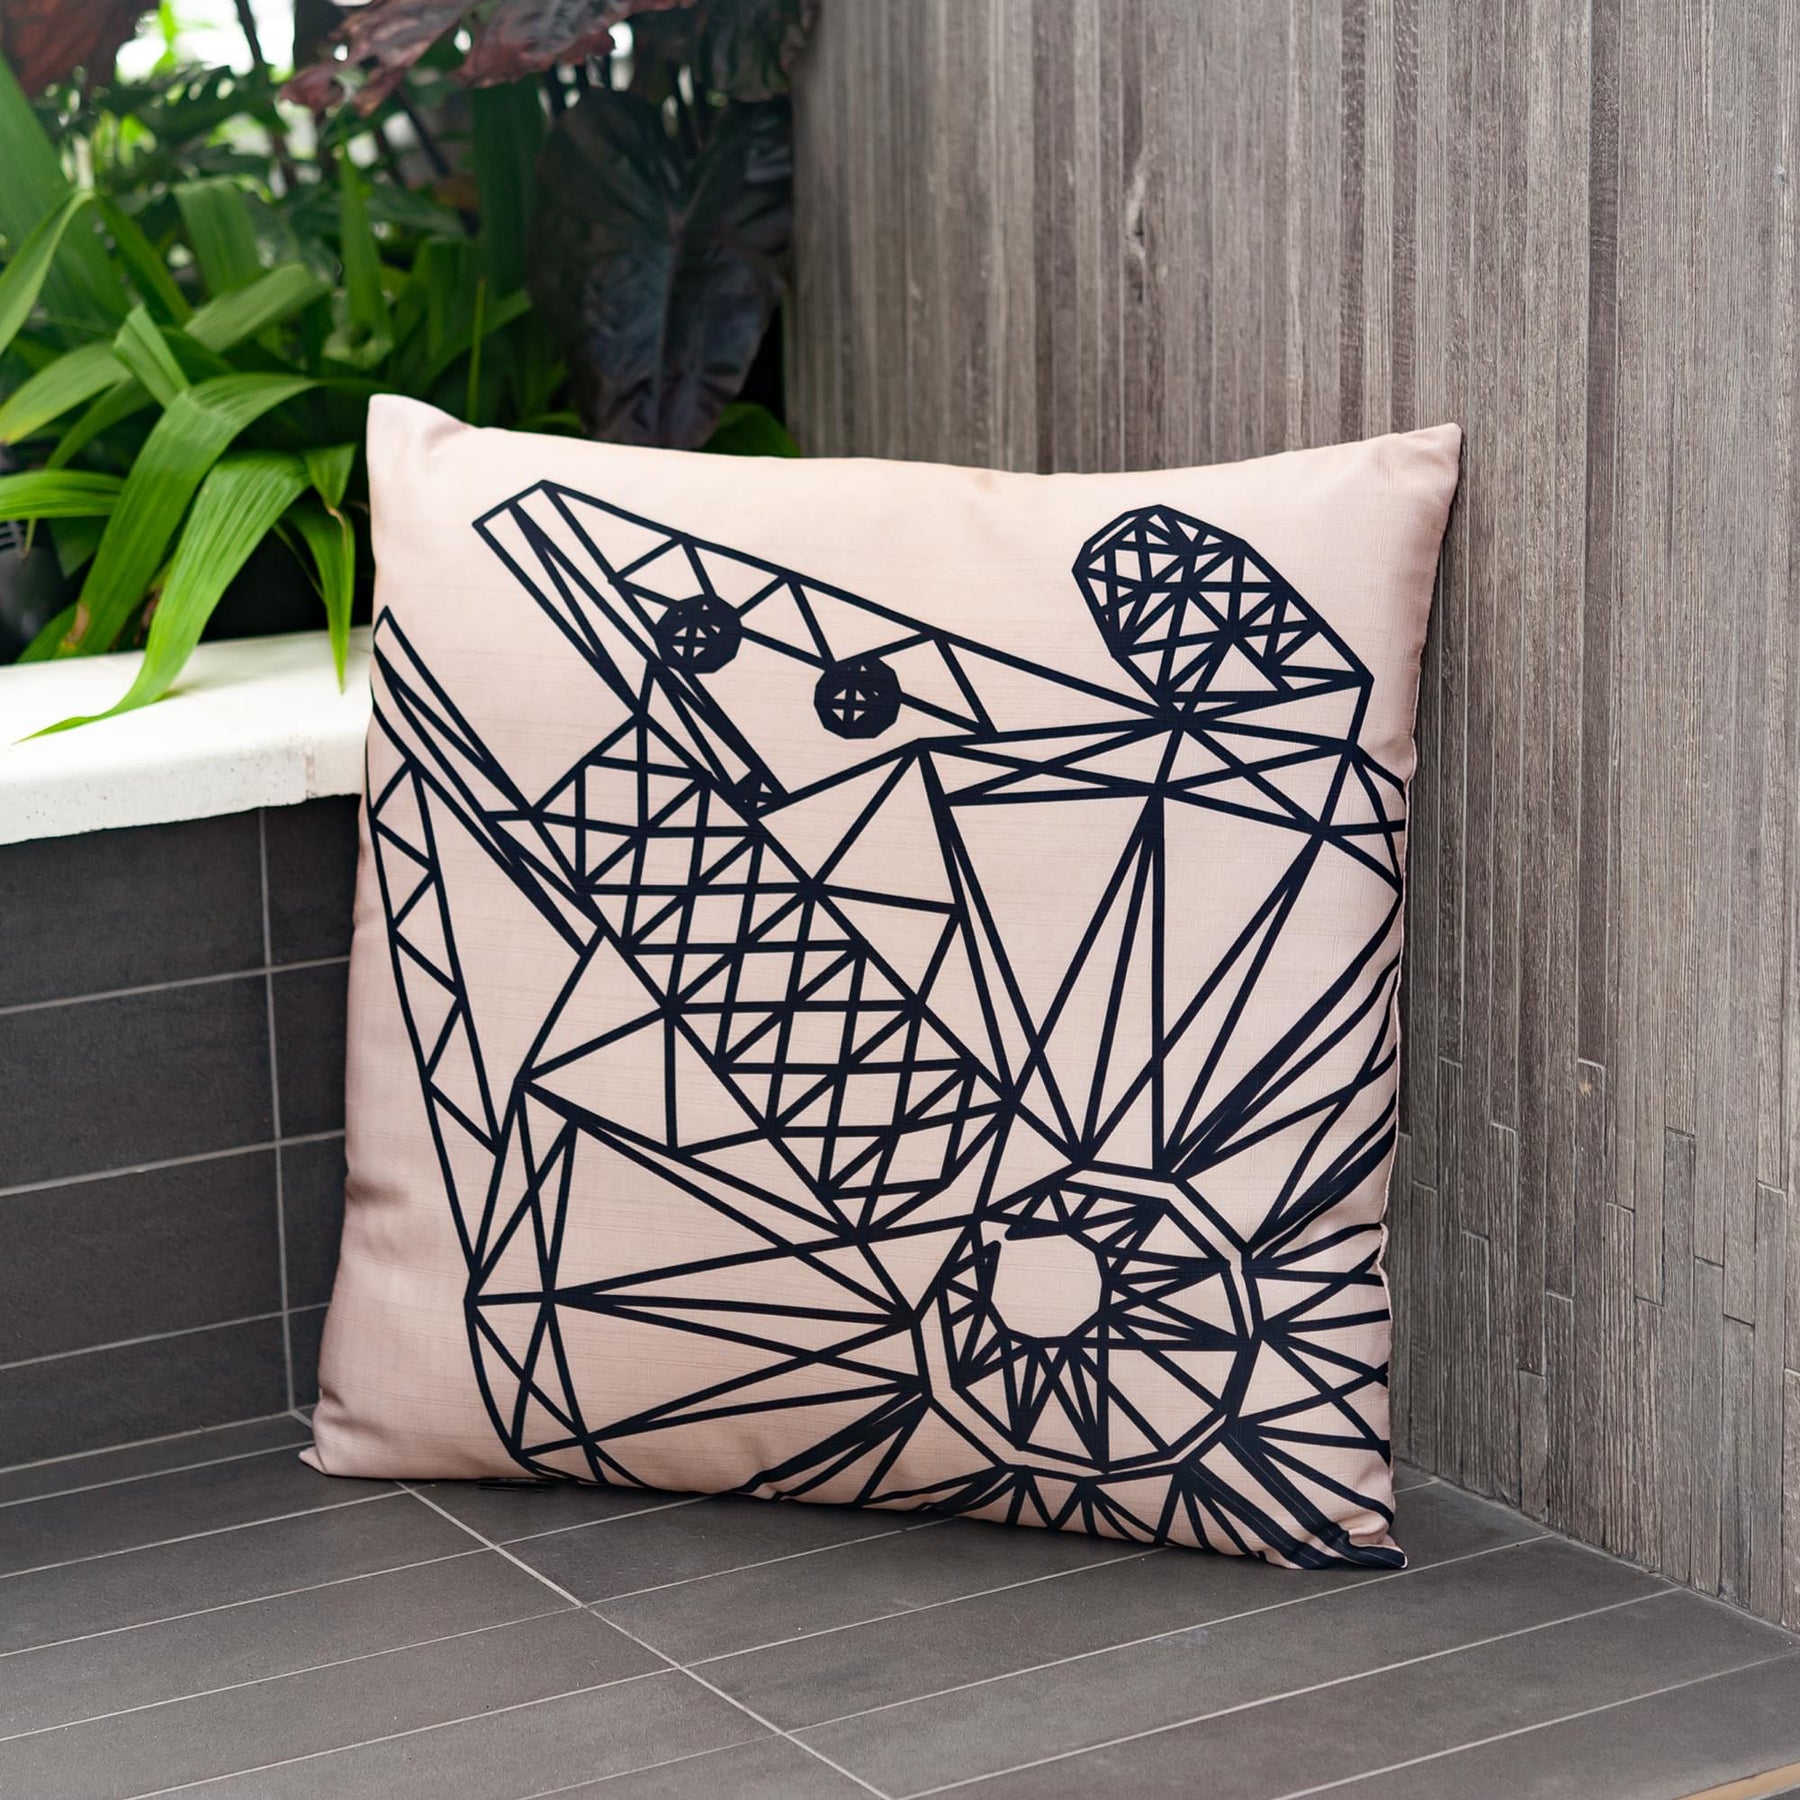 Star Wars Large Throw Pillow | Millennium Falcon Pattern | 25 x 25 Inches